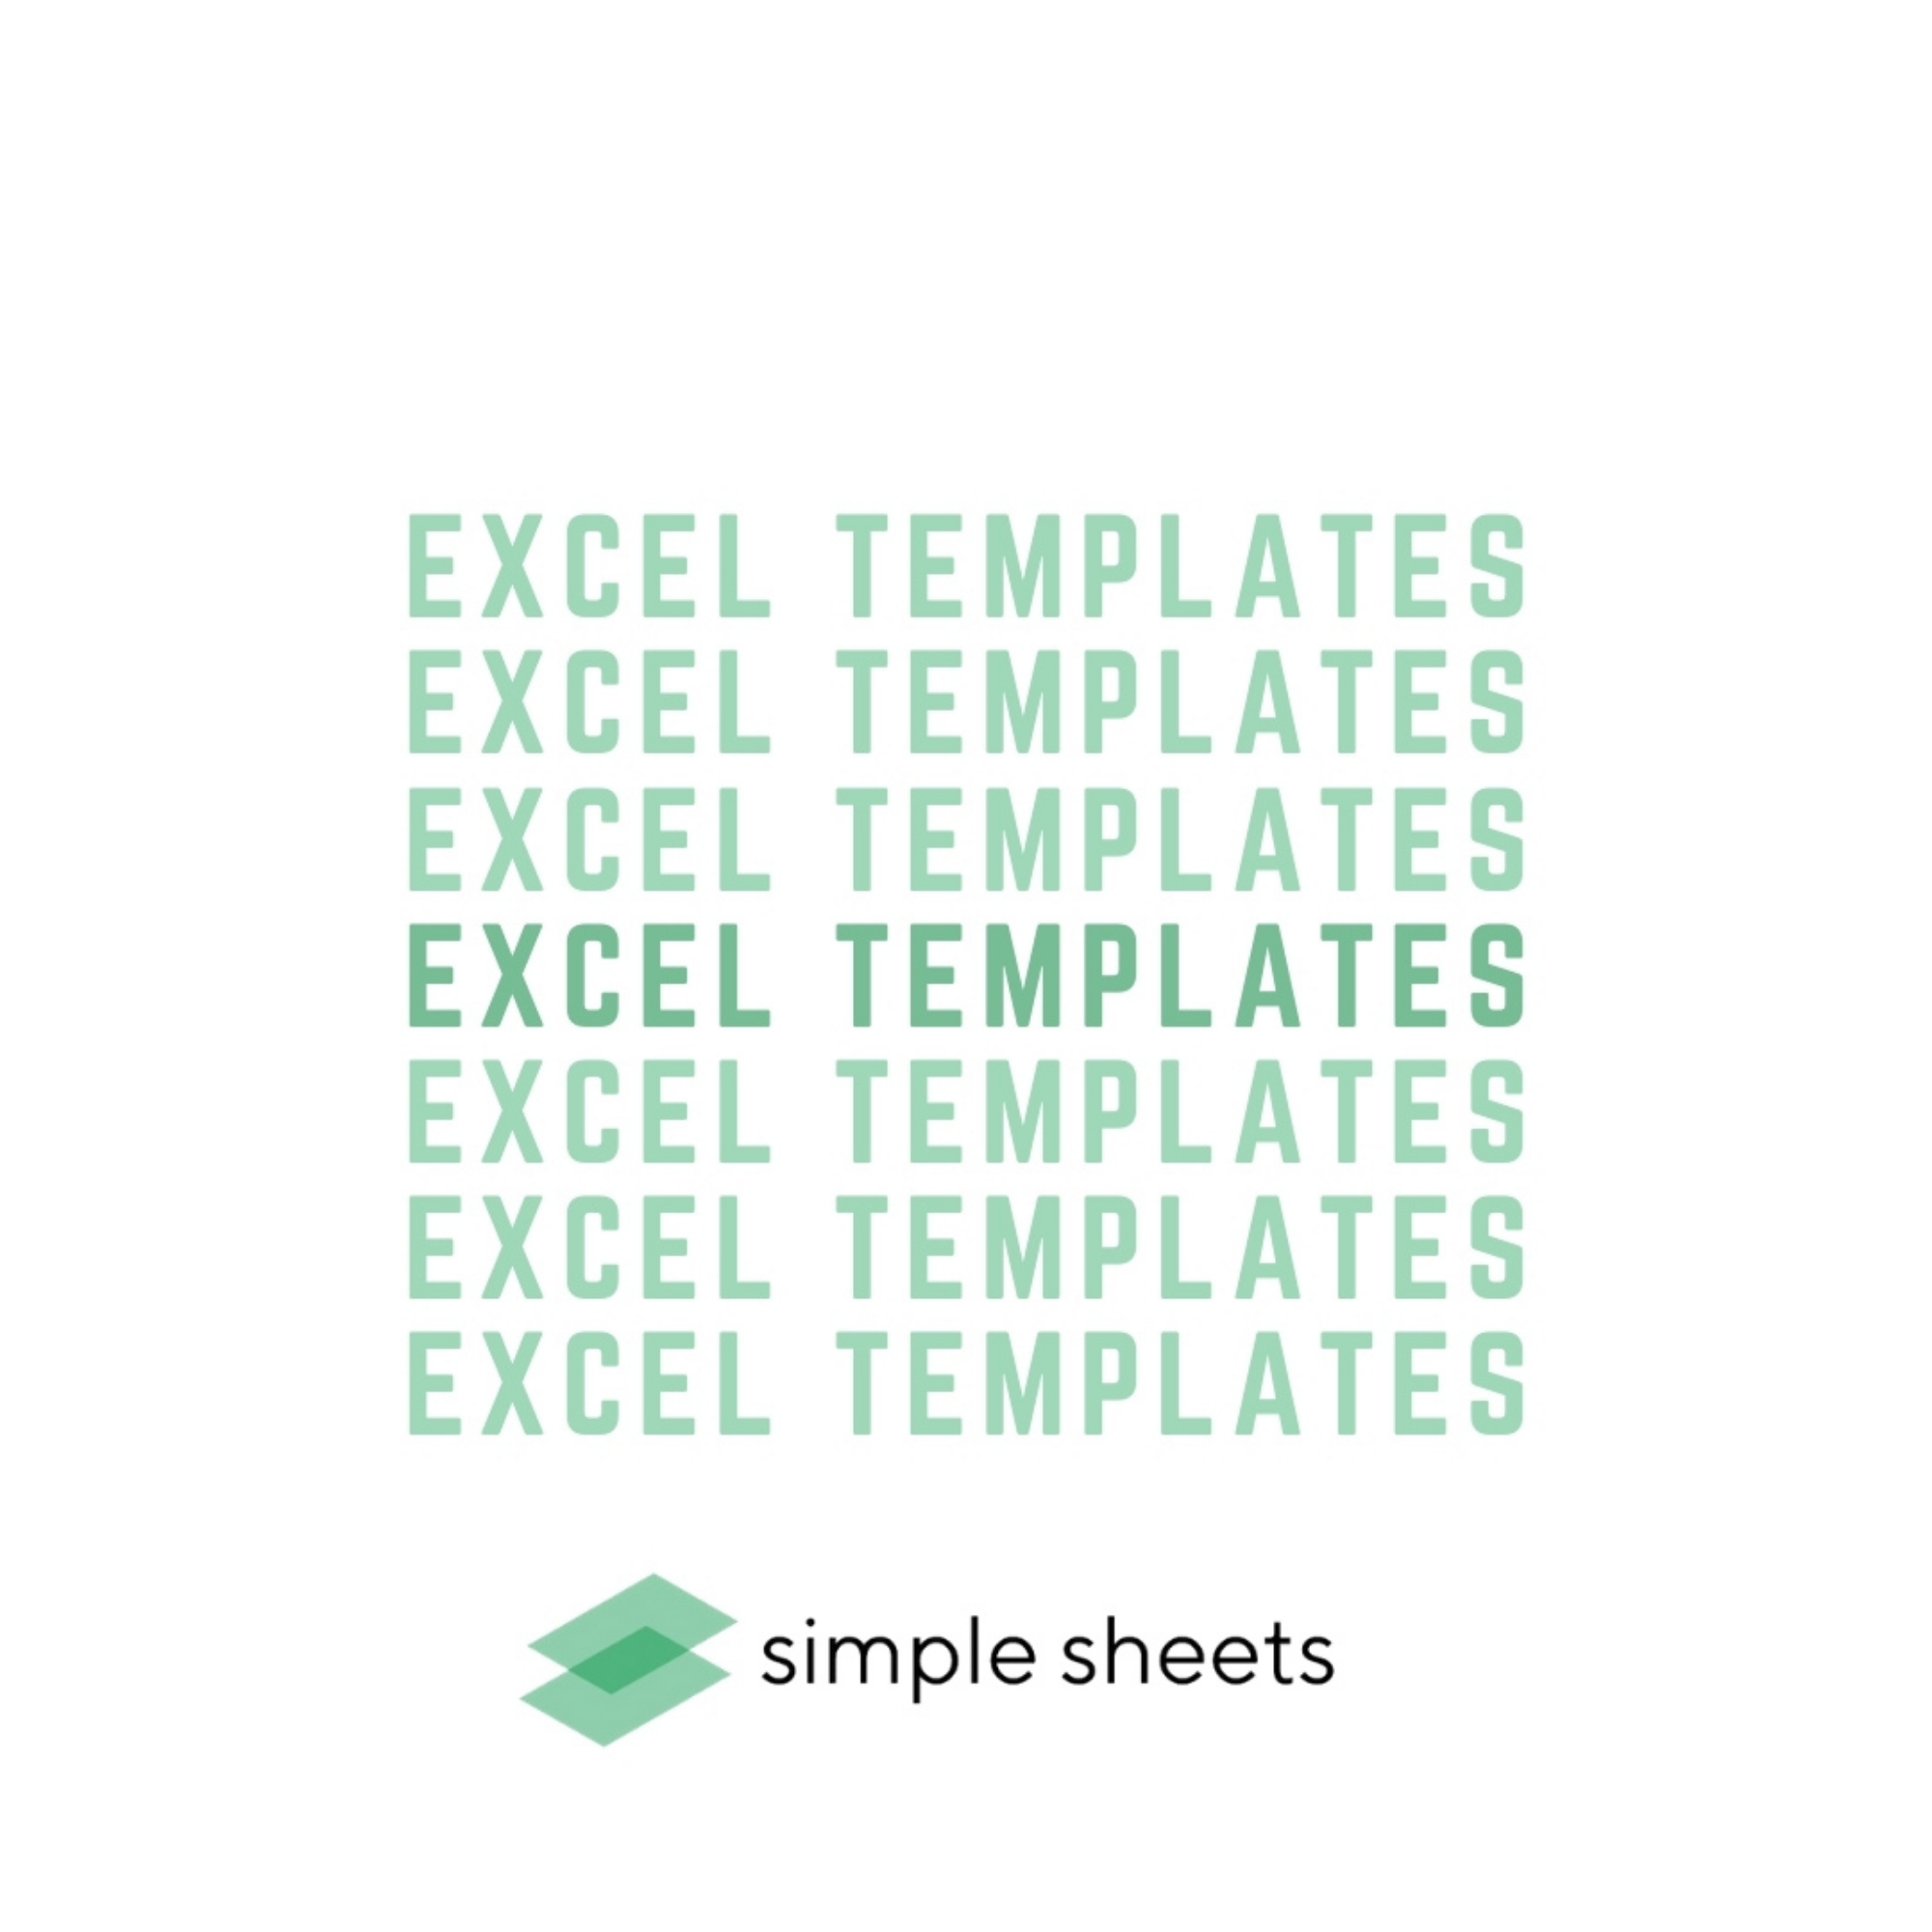 Raise Your Excel Spreadsheet Game with Simple Sheets Templates